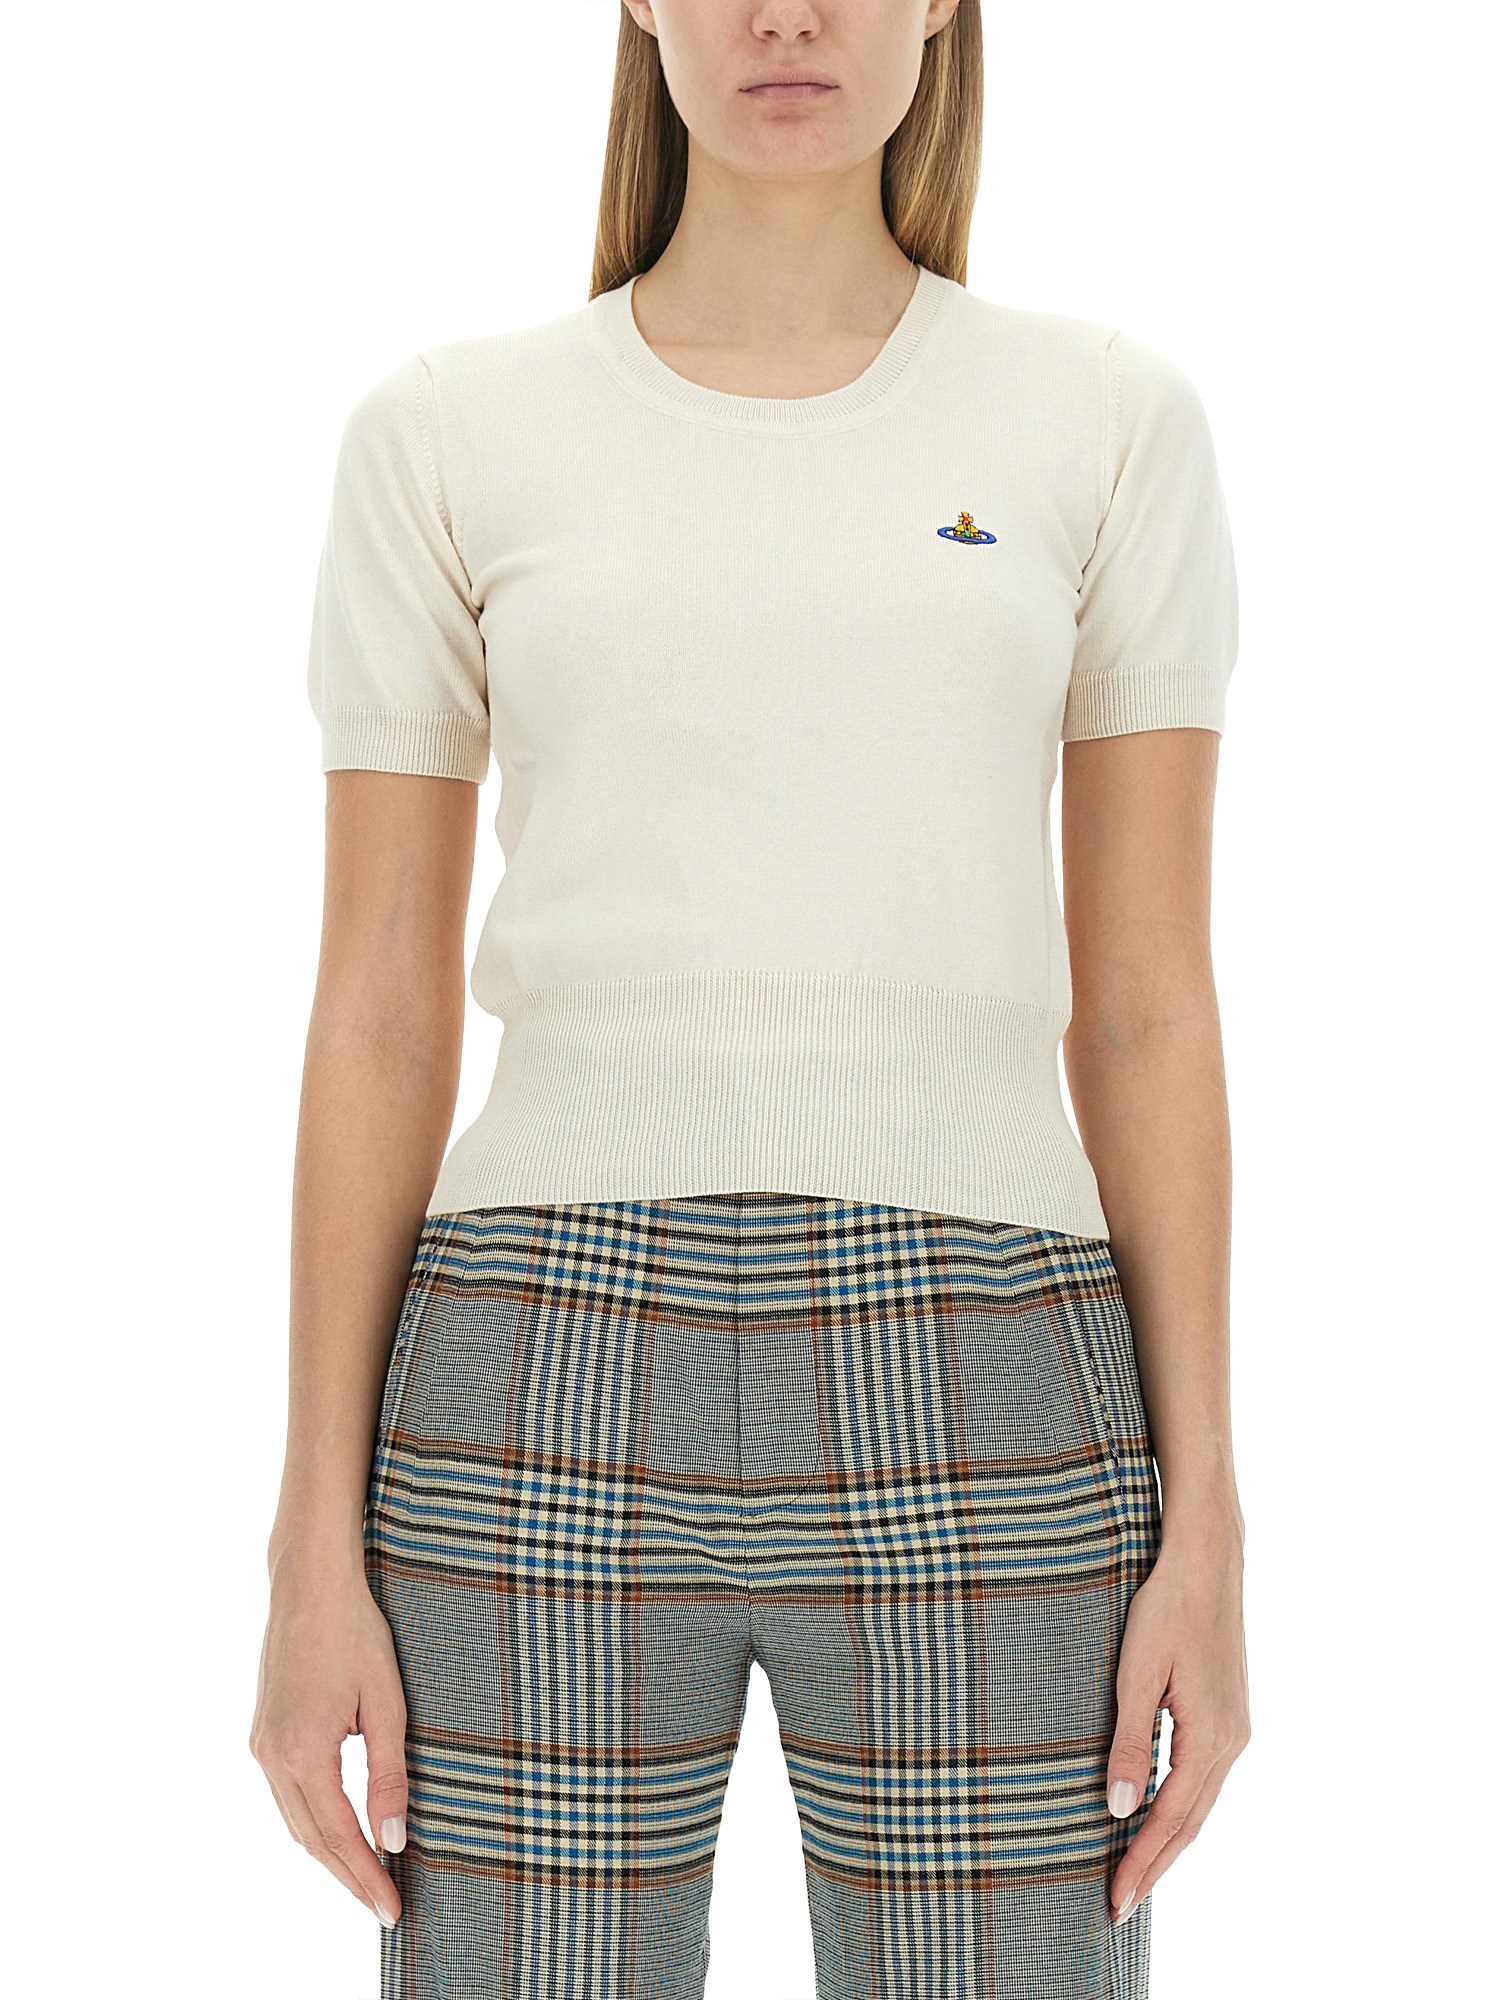 Vivienne Westwood Bea Shirt In Ivory